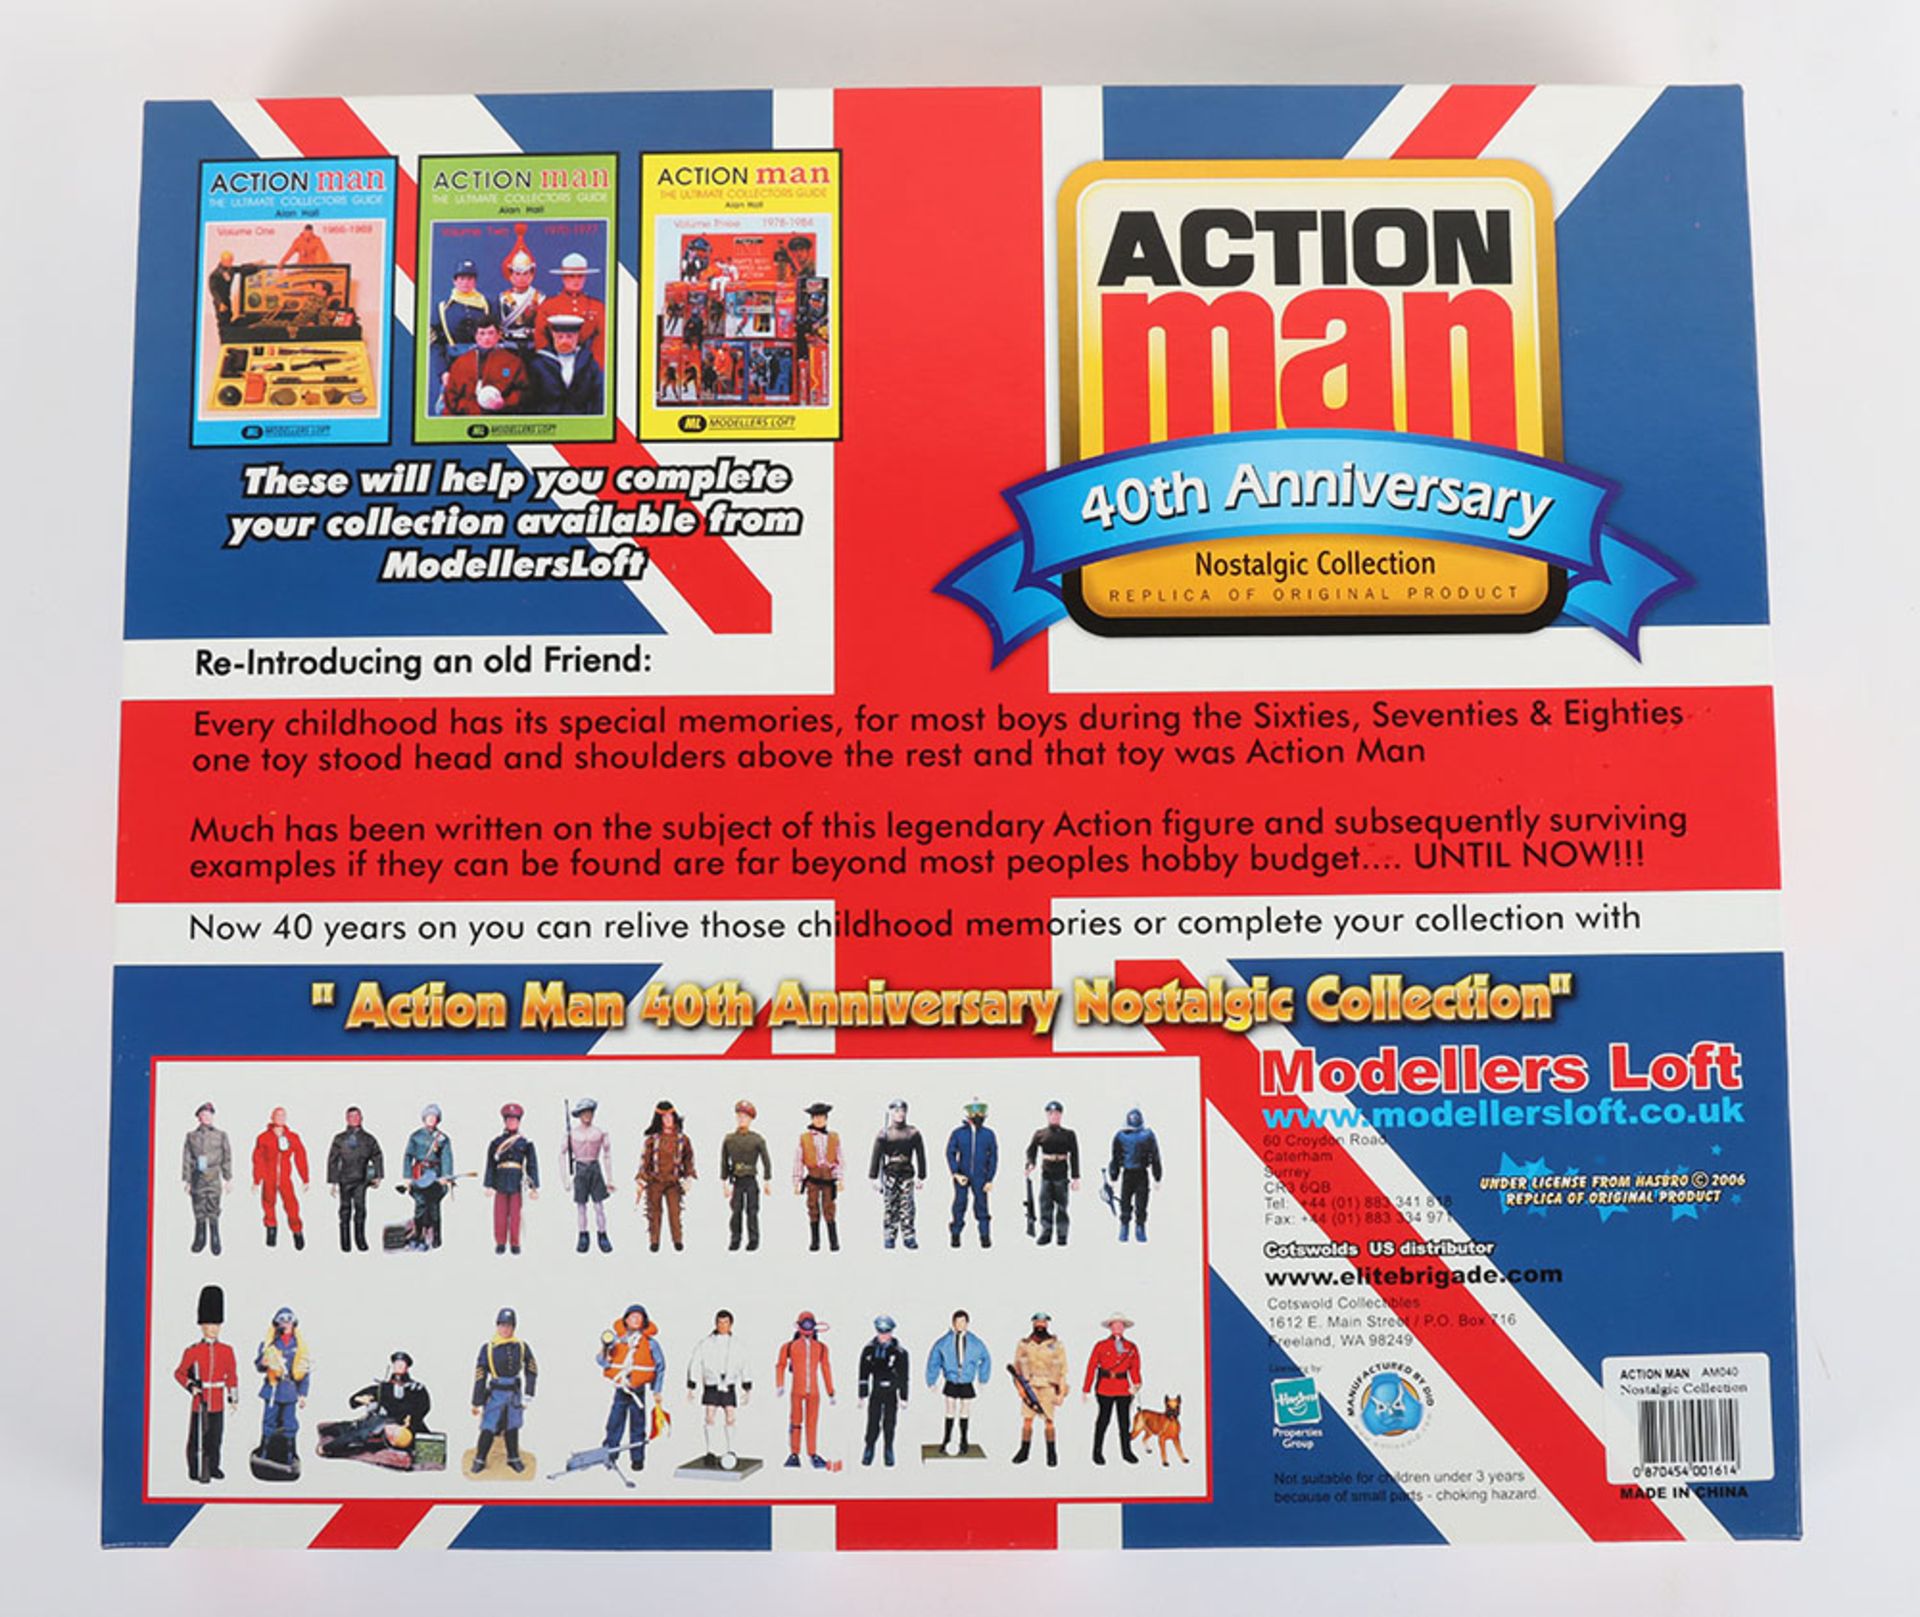 Action Man Battle Of Britain Pilot 40th Anniversary Nostalgic Collection - Image 2 of 4